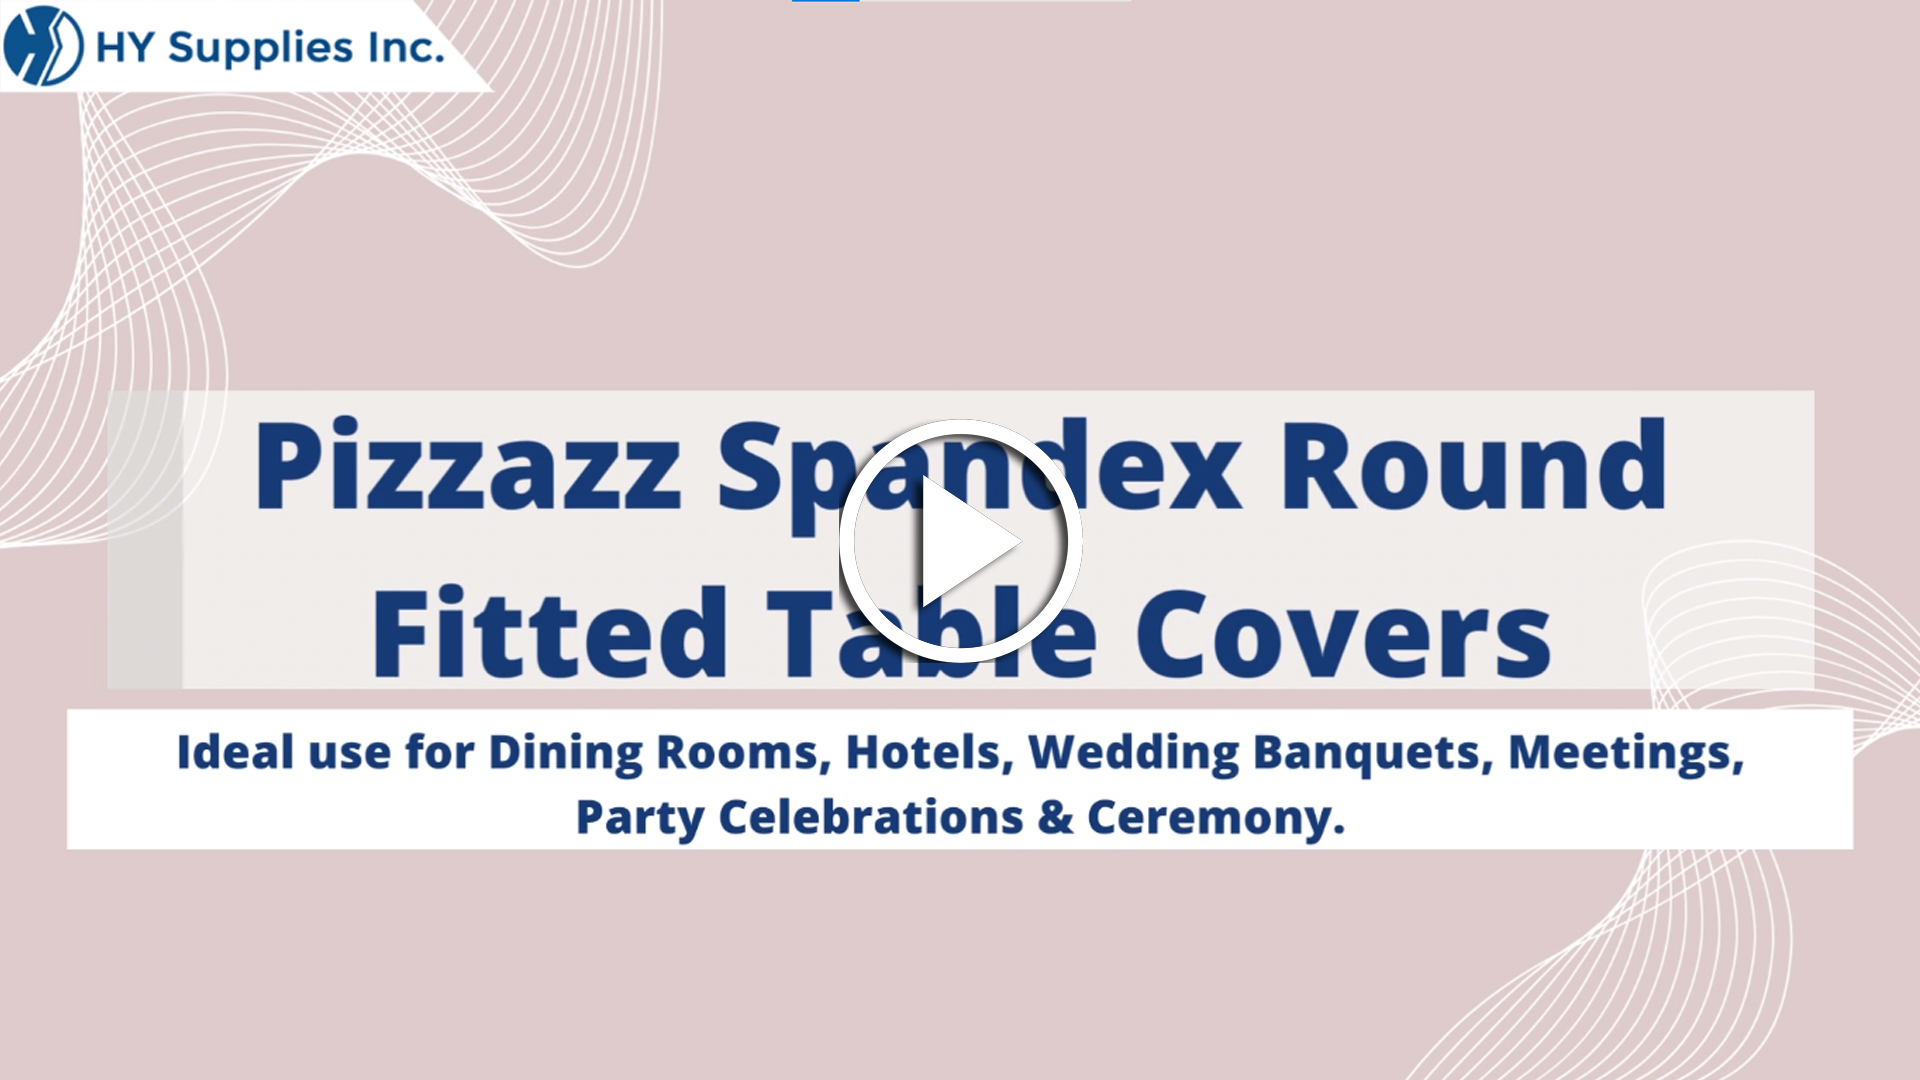 Pizzazz Spandex Round Fitted Table Covers